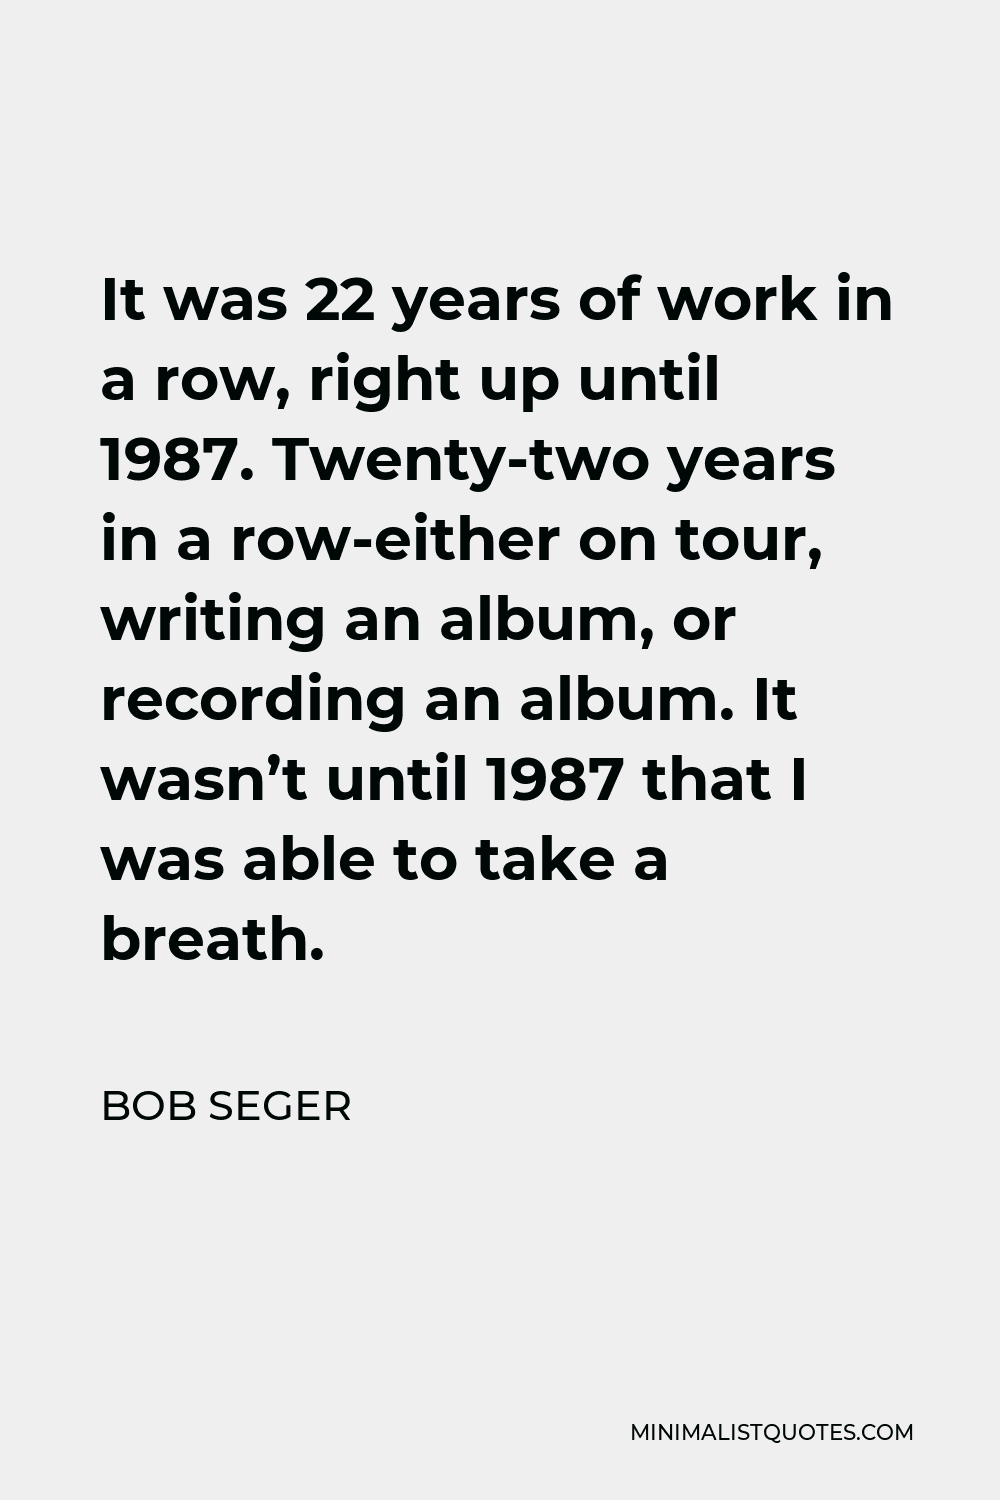 Bob Seger Quote - It was 22 years of work in a row, right up until 1987. Twenty-two years in a row-either on tour, writing an album, or recording an album. It wasn’t until 1987 that I was able to take a breath.